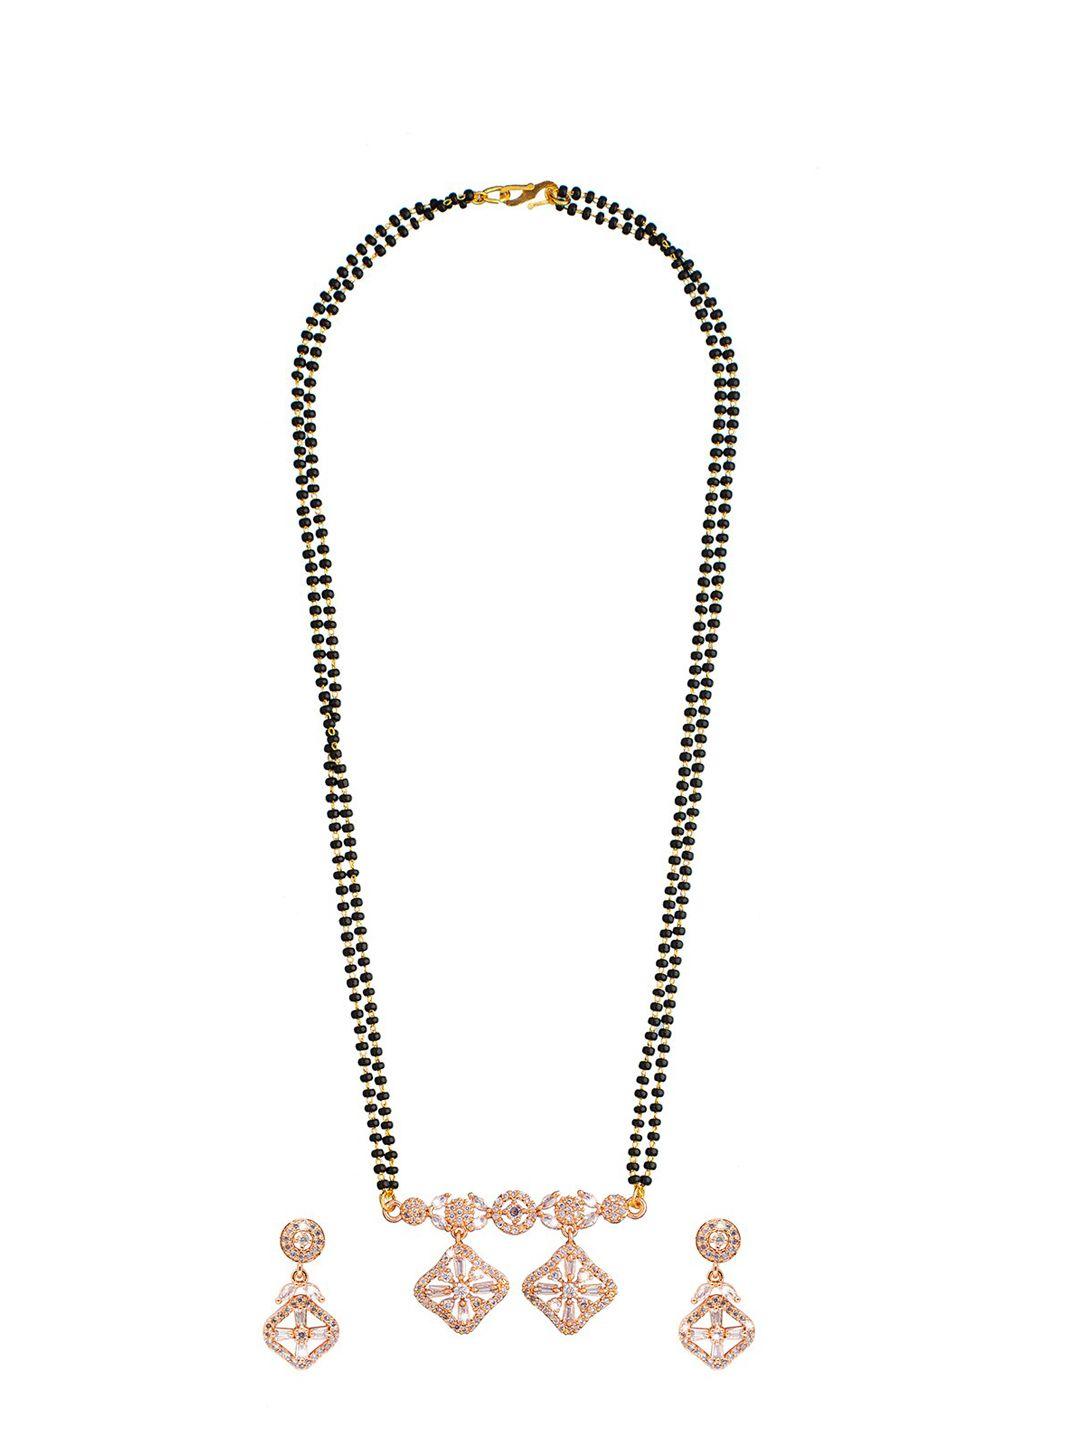 shining jewel - by shivansh rose gold-plated black beaded white stone studded mangalsutra with earrings